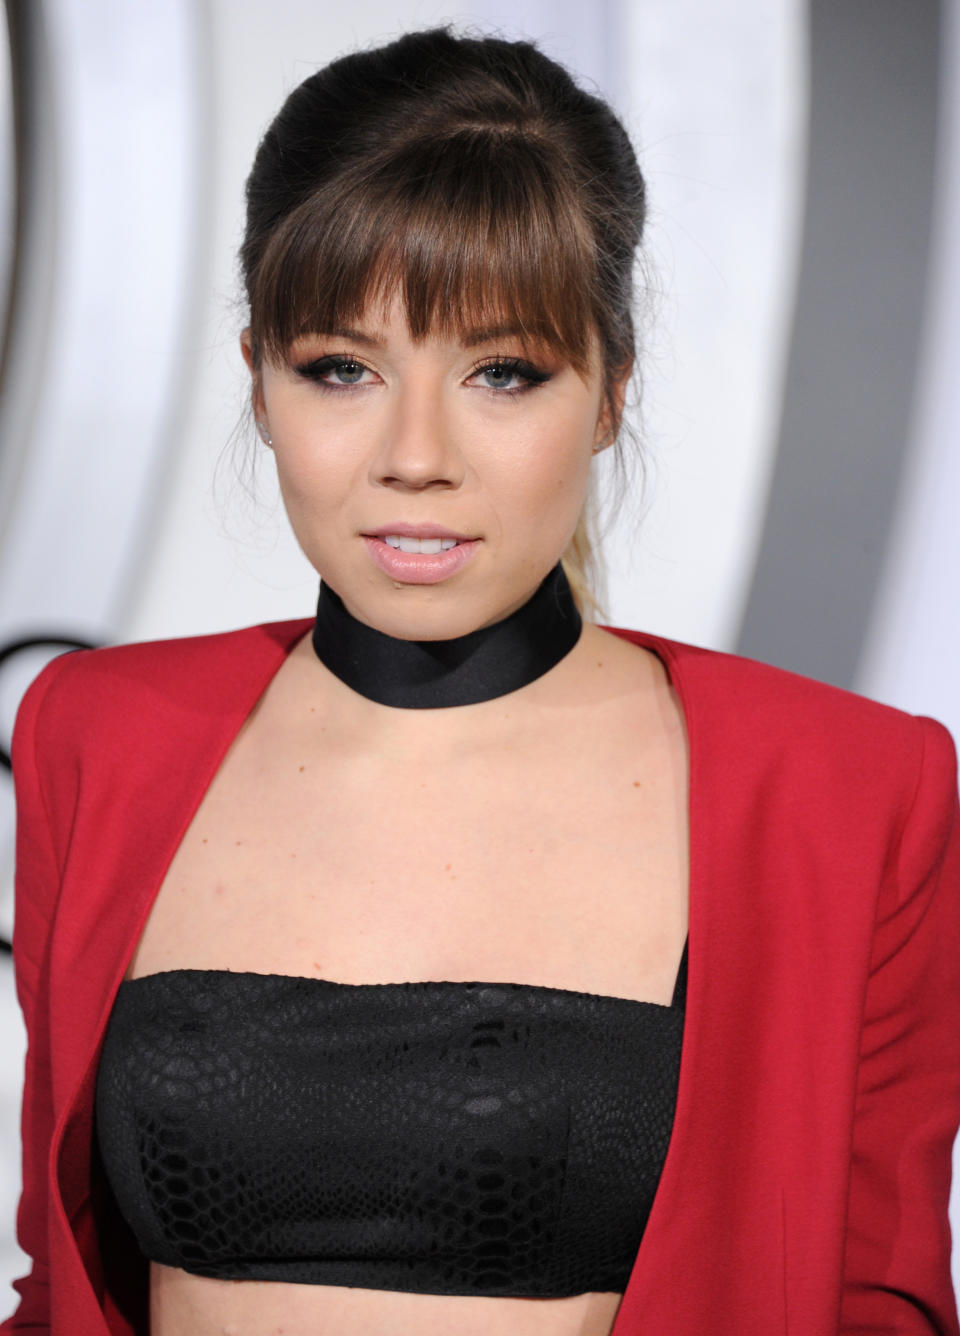 ctress Jennette McCurdy arrives at the premiere of Columbia Pictures' "Passengers" at Regency Village Theatre on December 14, 2016